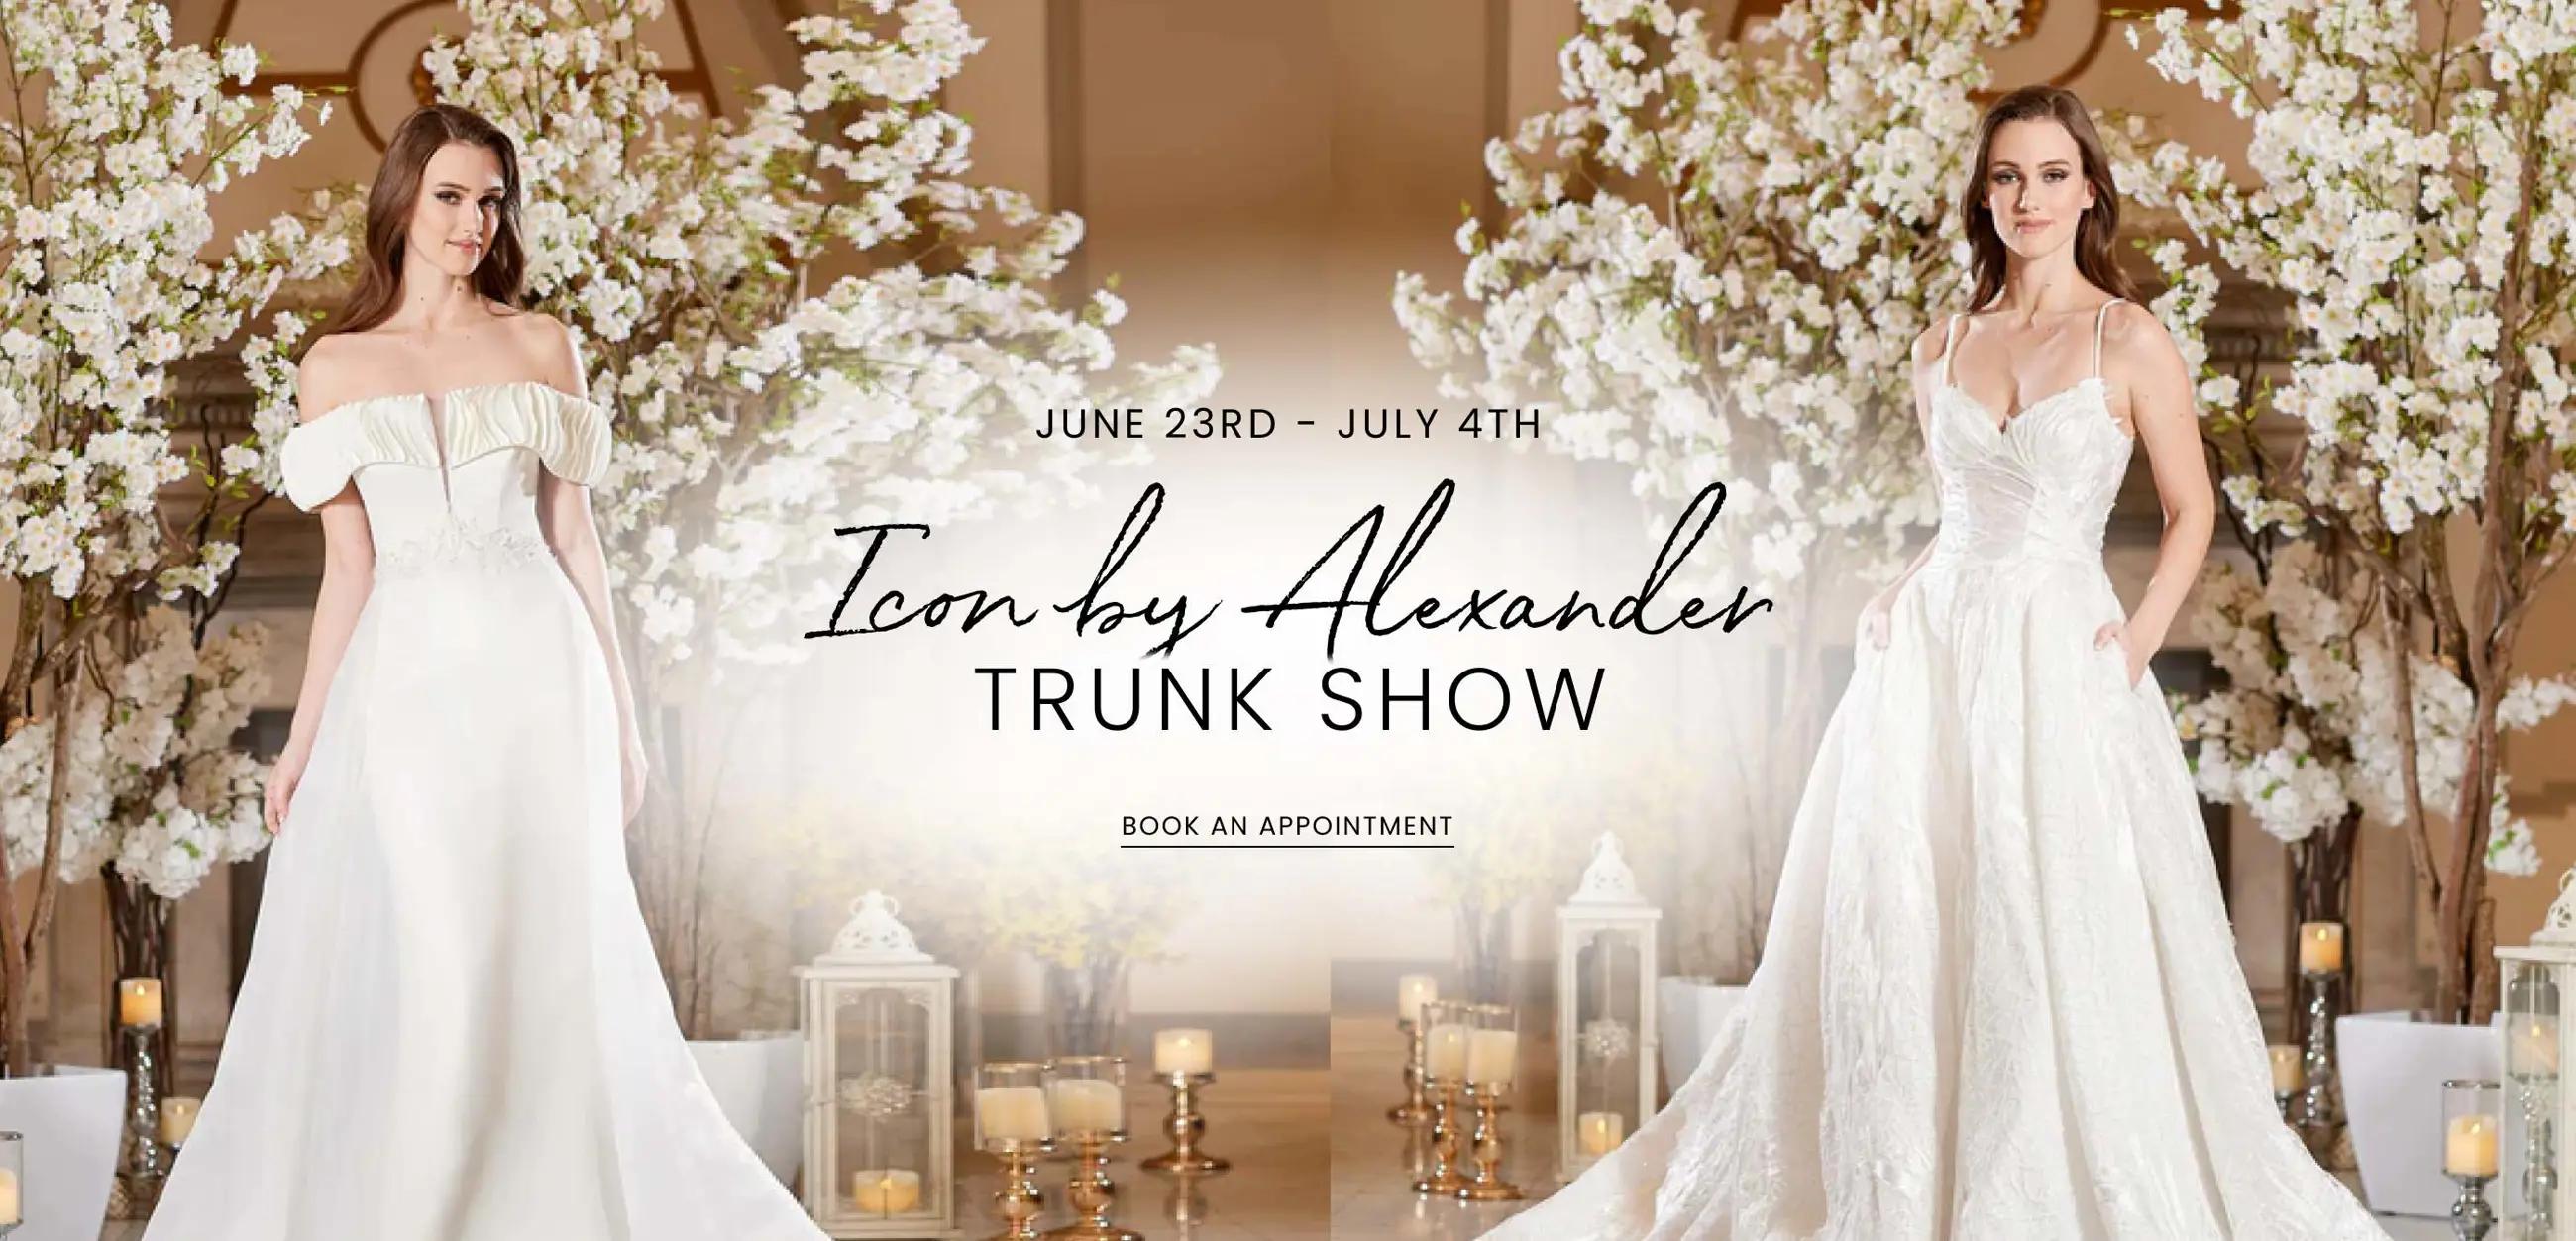 ICON by Alexander Trunk Show at Dublin Bridal. Models wearing wedding gowns. Desktop image.